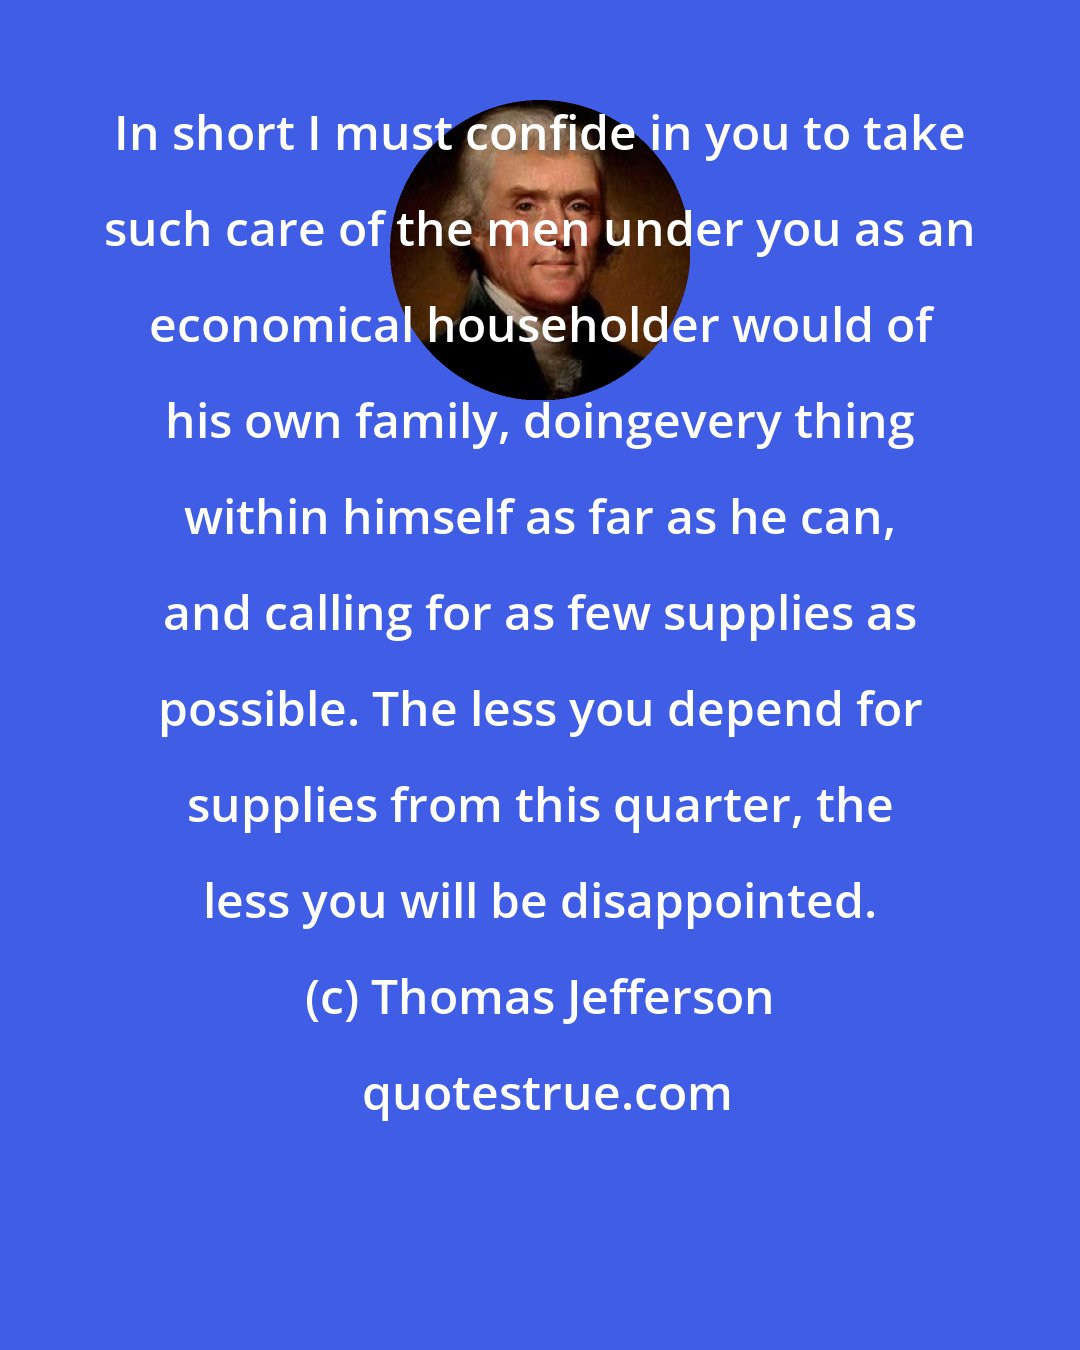 Thomas Jefferson: In short I must confide in you to take such care of the men under you as an economical householder would of his own family, doingevery thing within himself as far as he can, and calling for as few supplies as possible. The less you depend for supplies from this quarter, the less you will be disappointed.